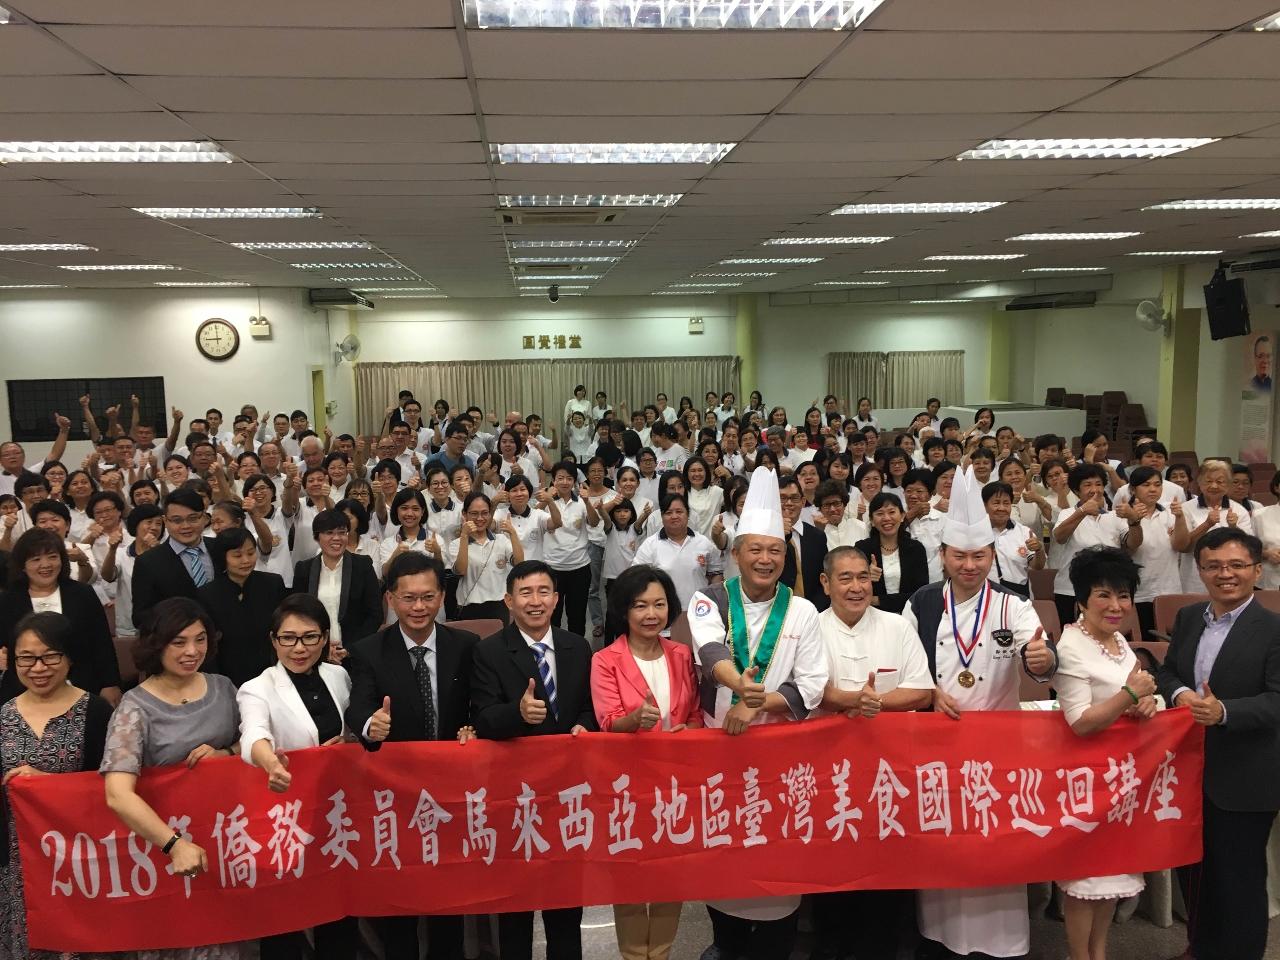 Malaysia 2018 Tour of Taiwan Gourmet Cuisines Opening Ceremony all participants photo.